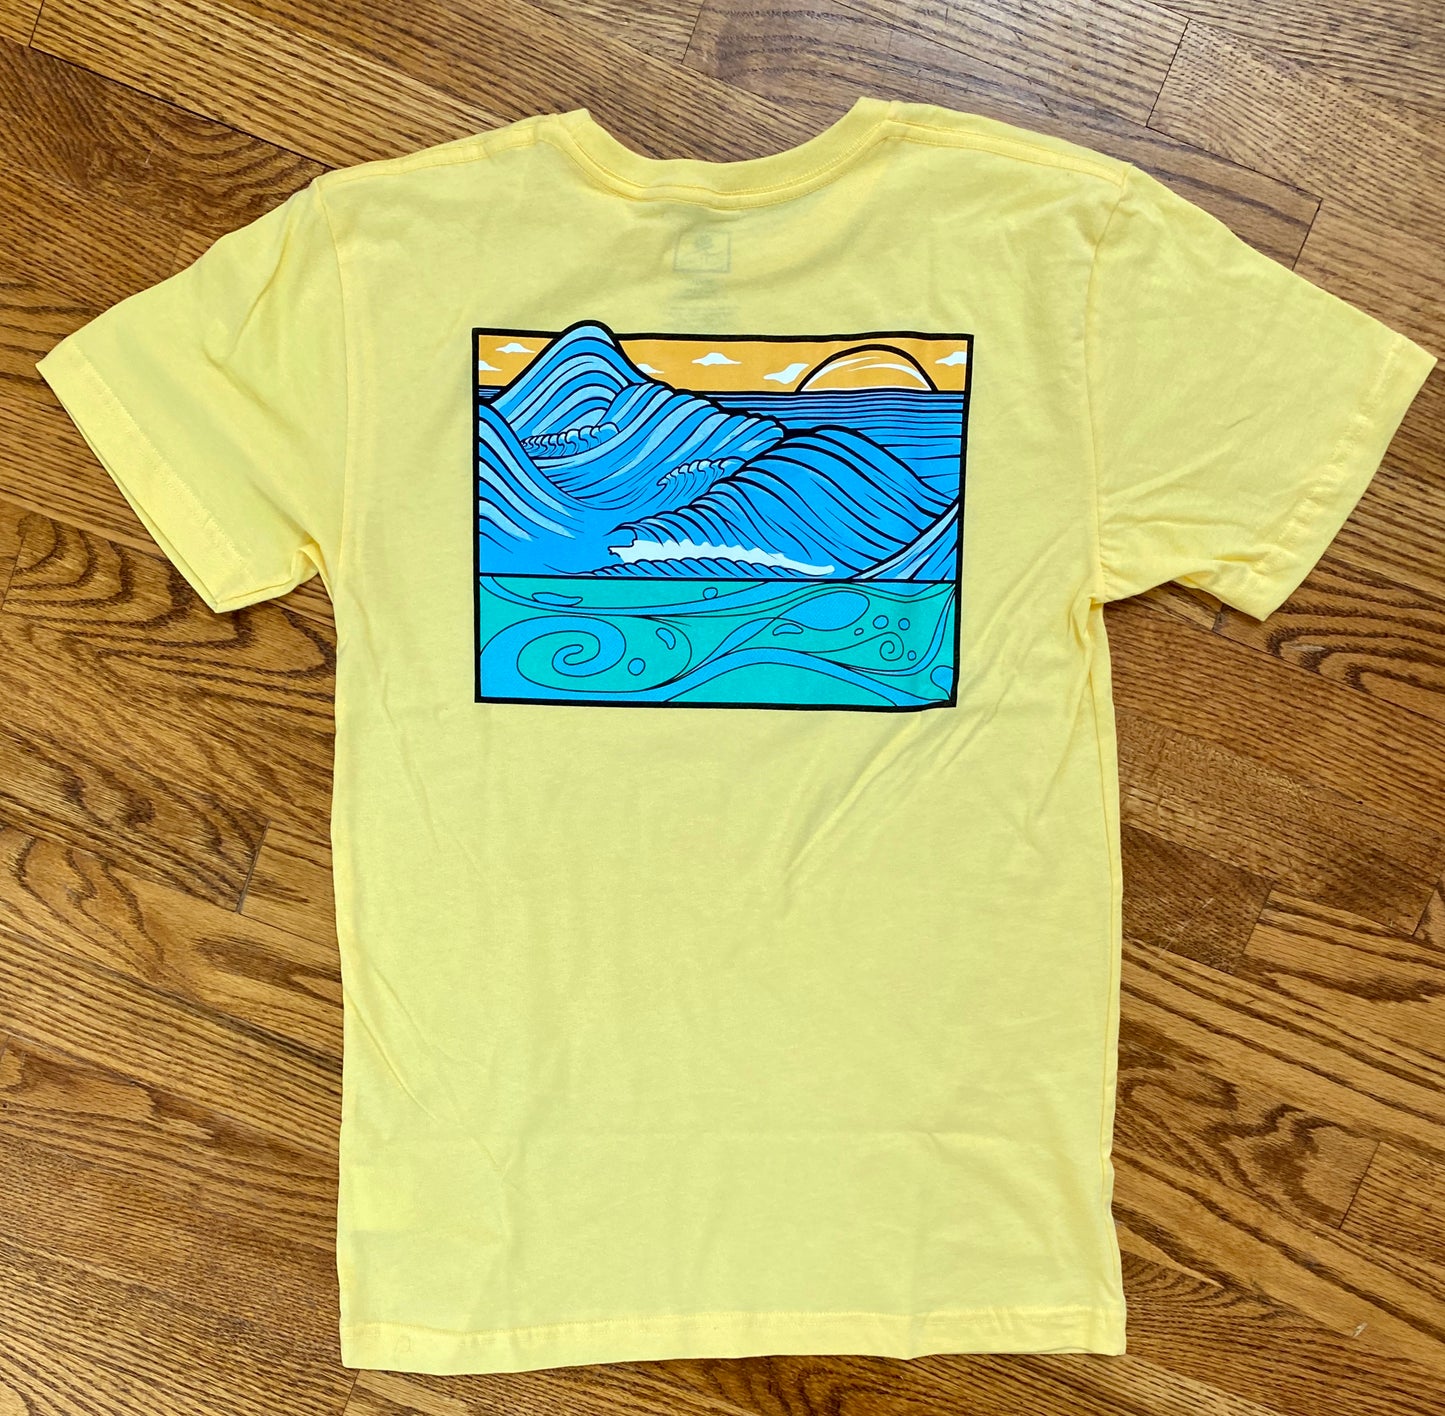 Graphic Surf Lotus - "T for a Cause" - Waves Short Sleeve - Sun